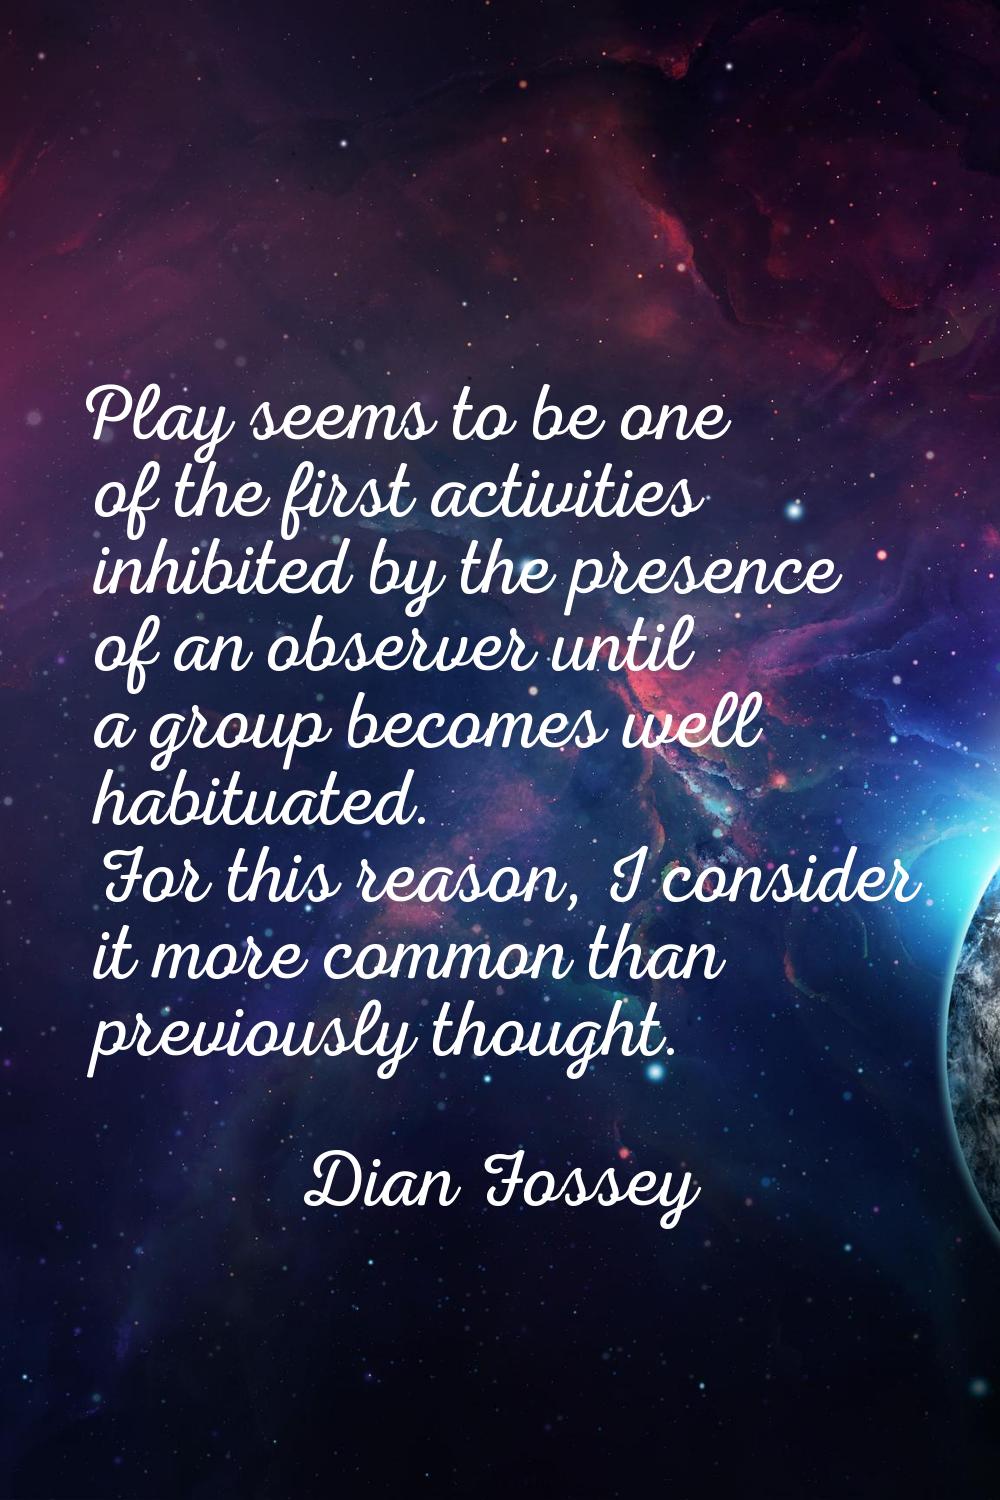 Play seems to be one of the first activities inhibited by the presence of an observer until a group